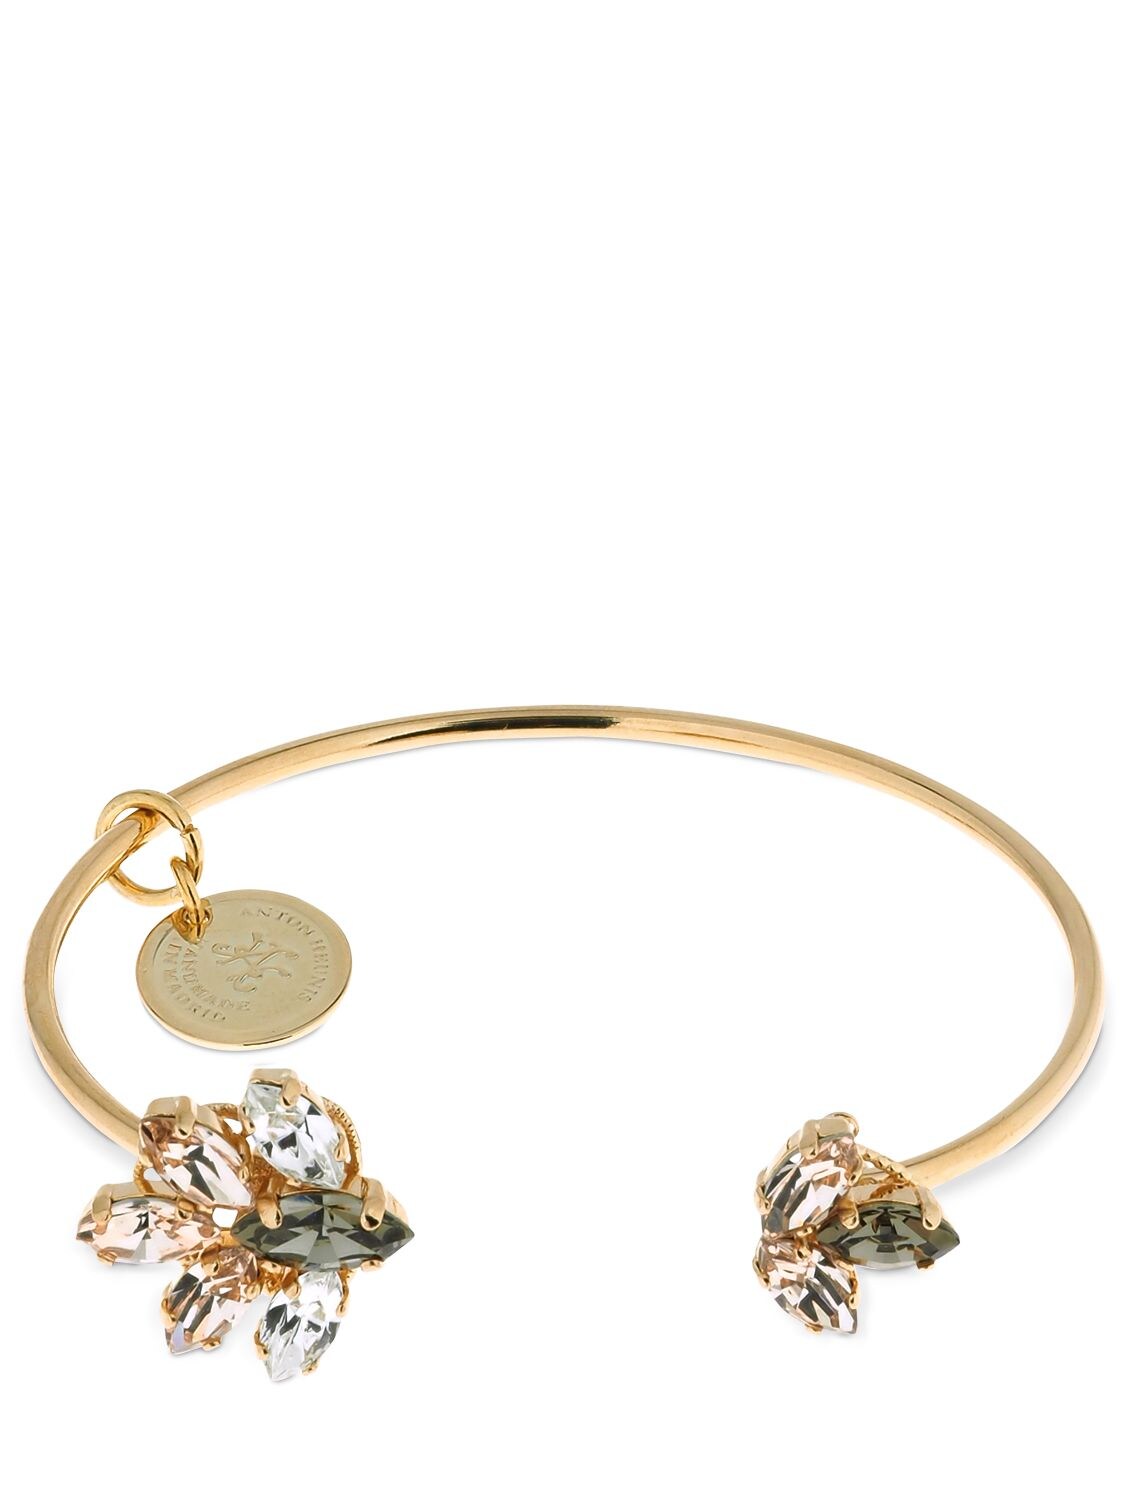 Anton Heunis Small Crystal Cuff Bracelet In Gold,crystal